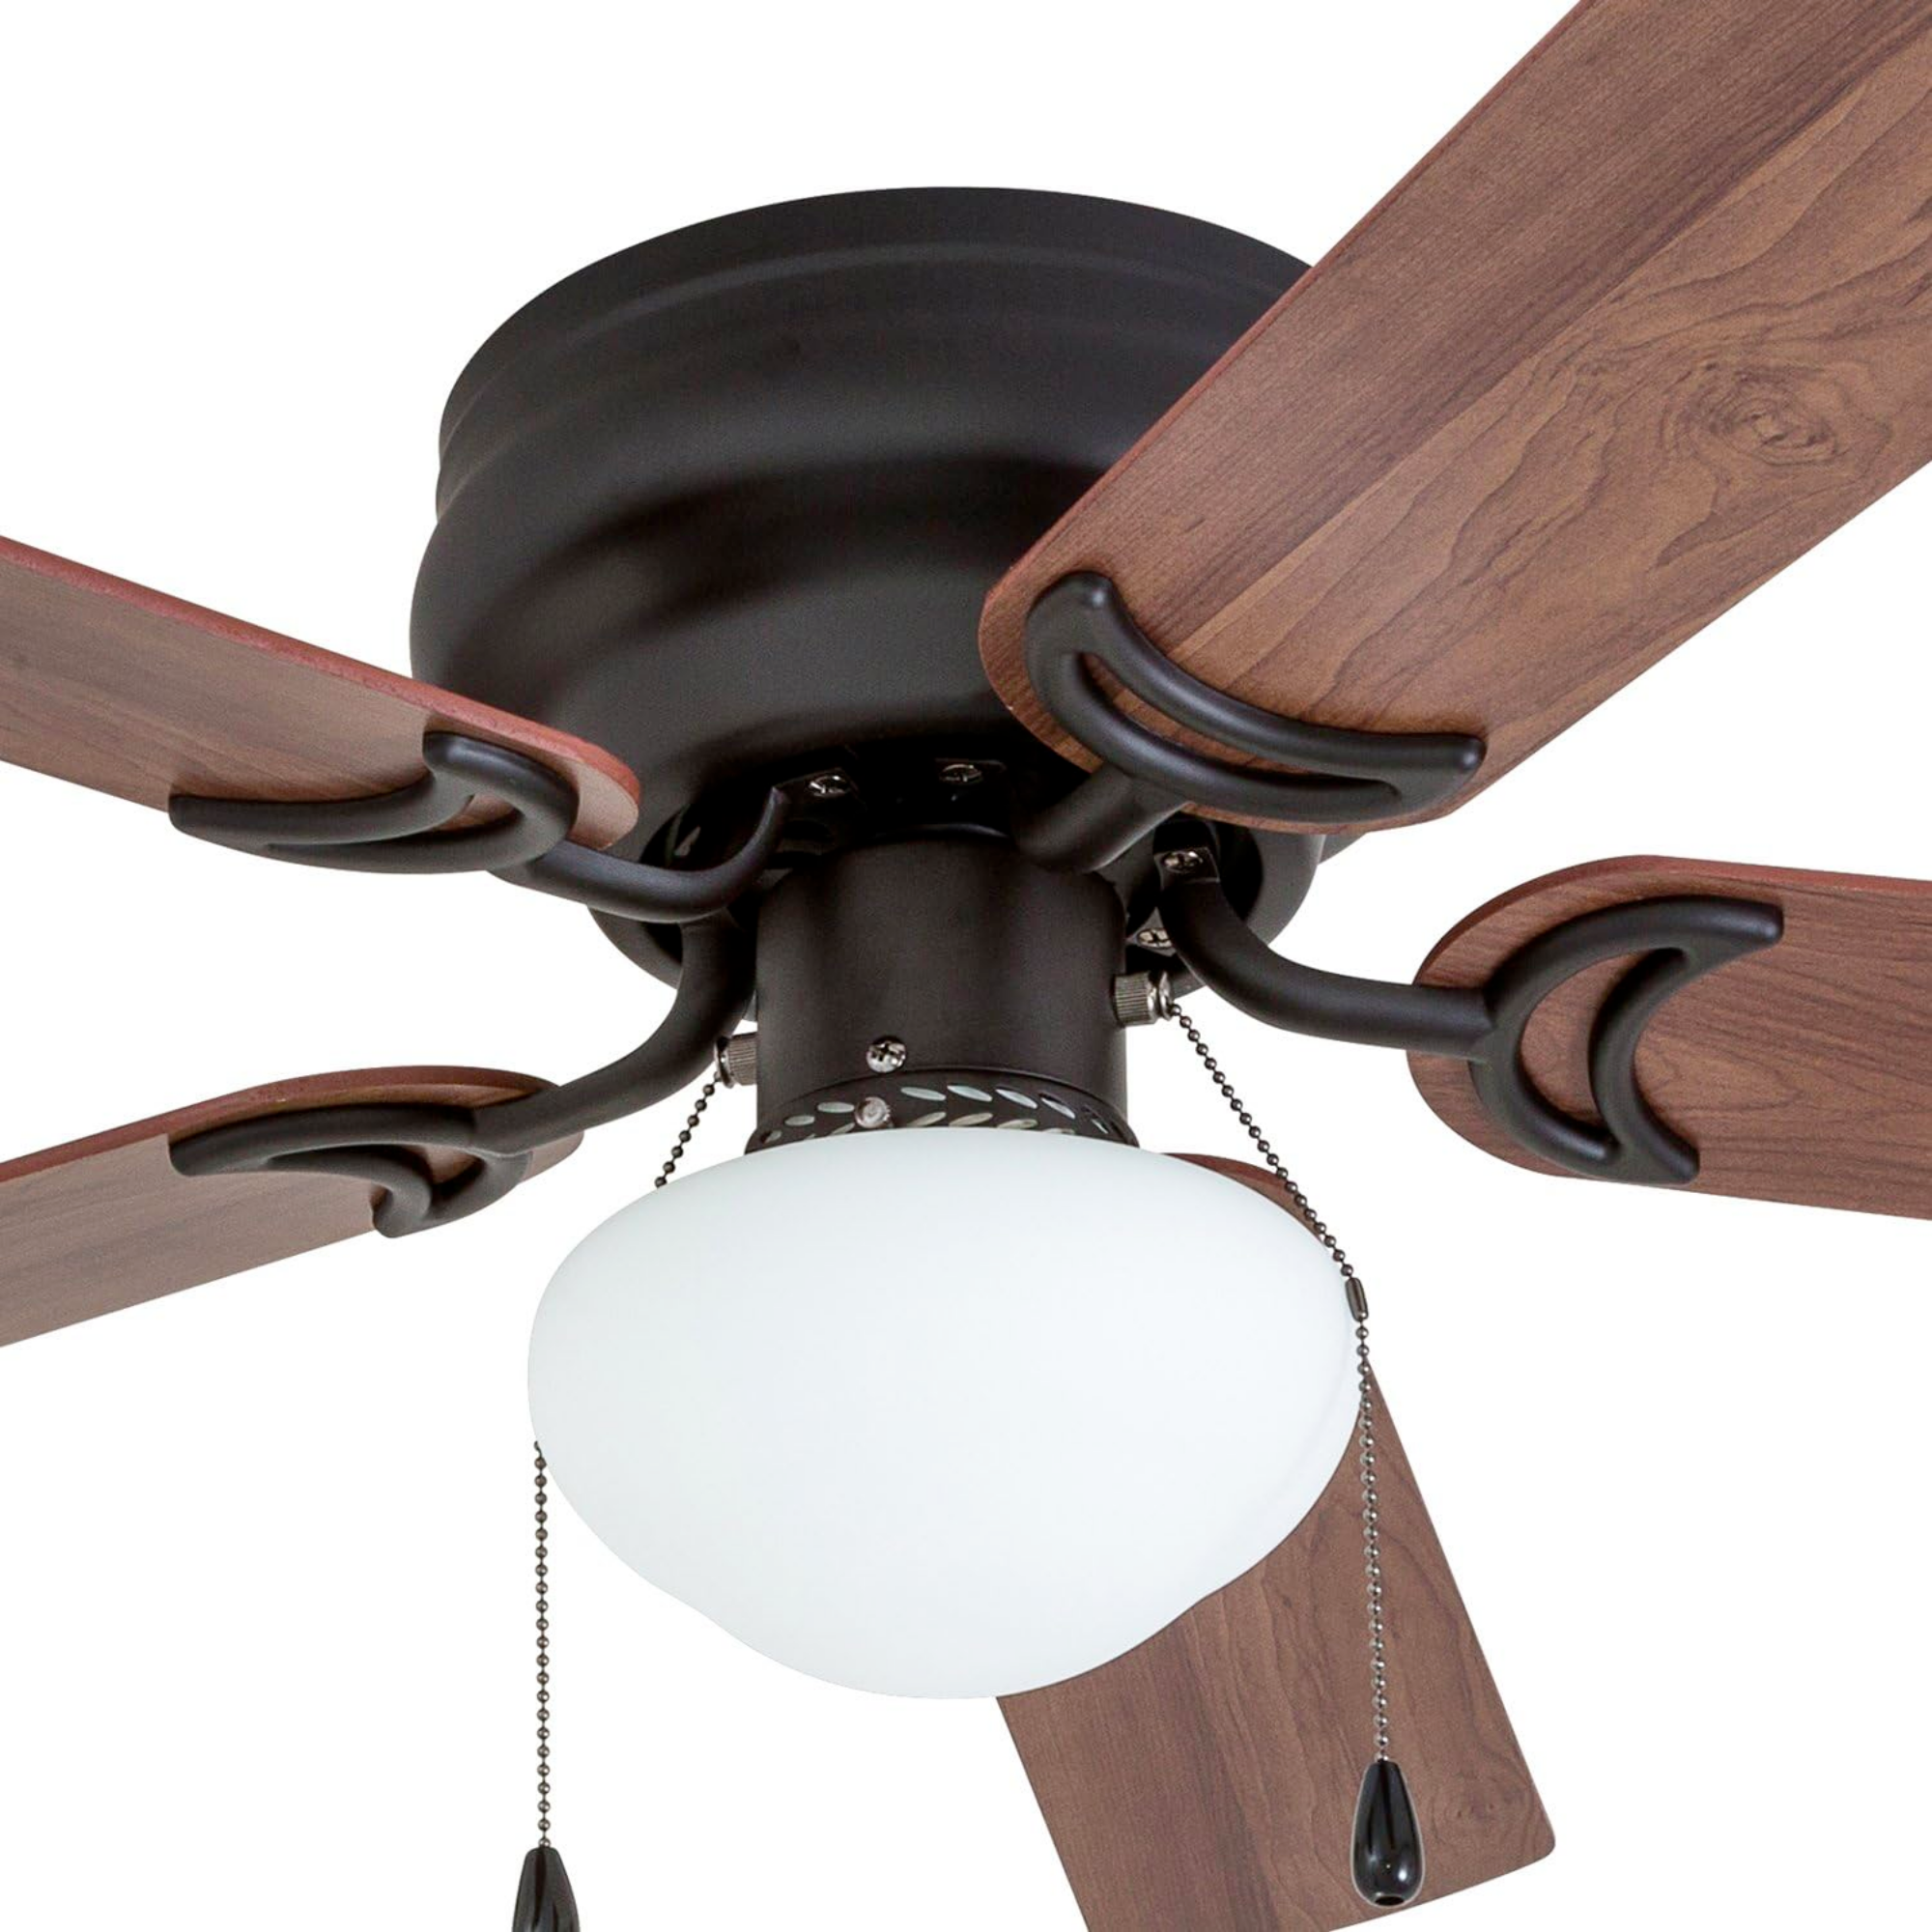 42 Inch Alvina, Bronze, Pull Chain, Ceiling Fan by Prominence Home